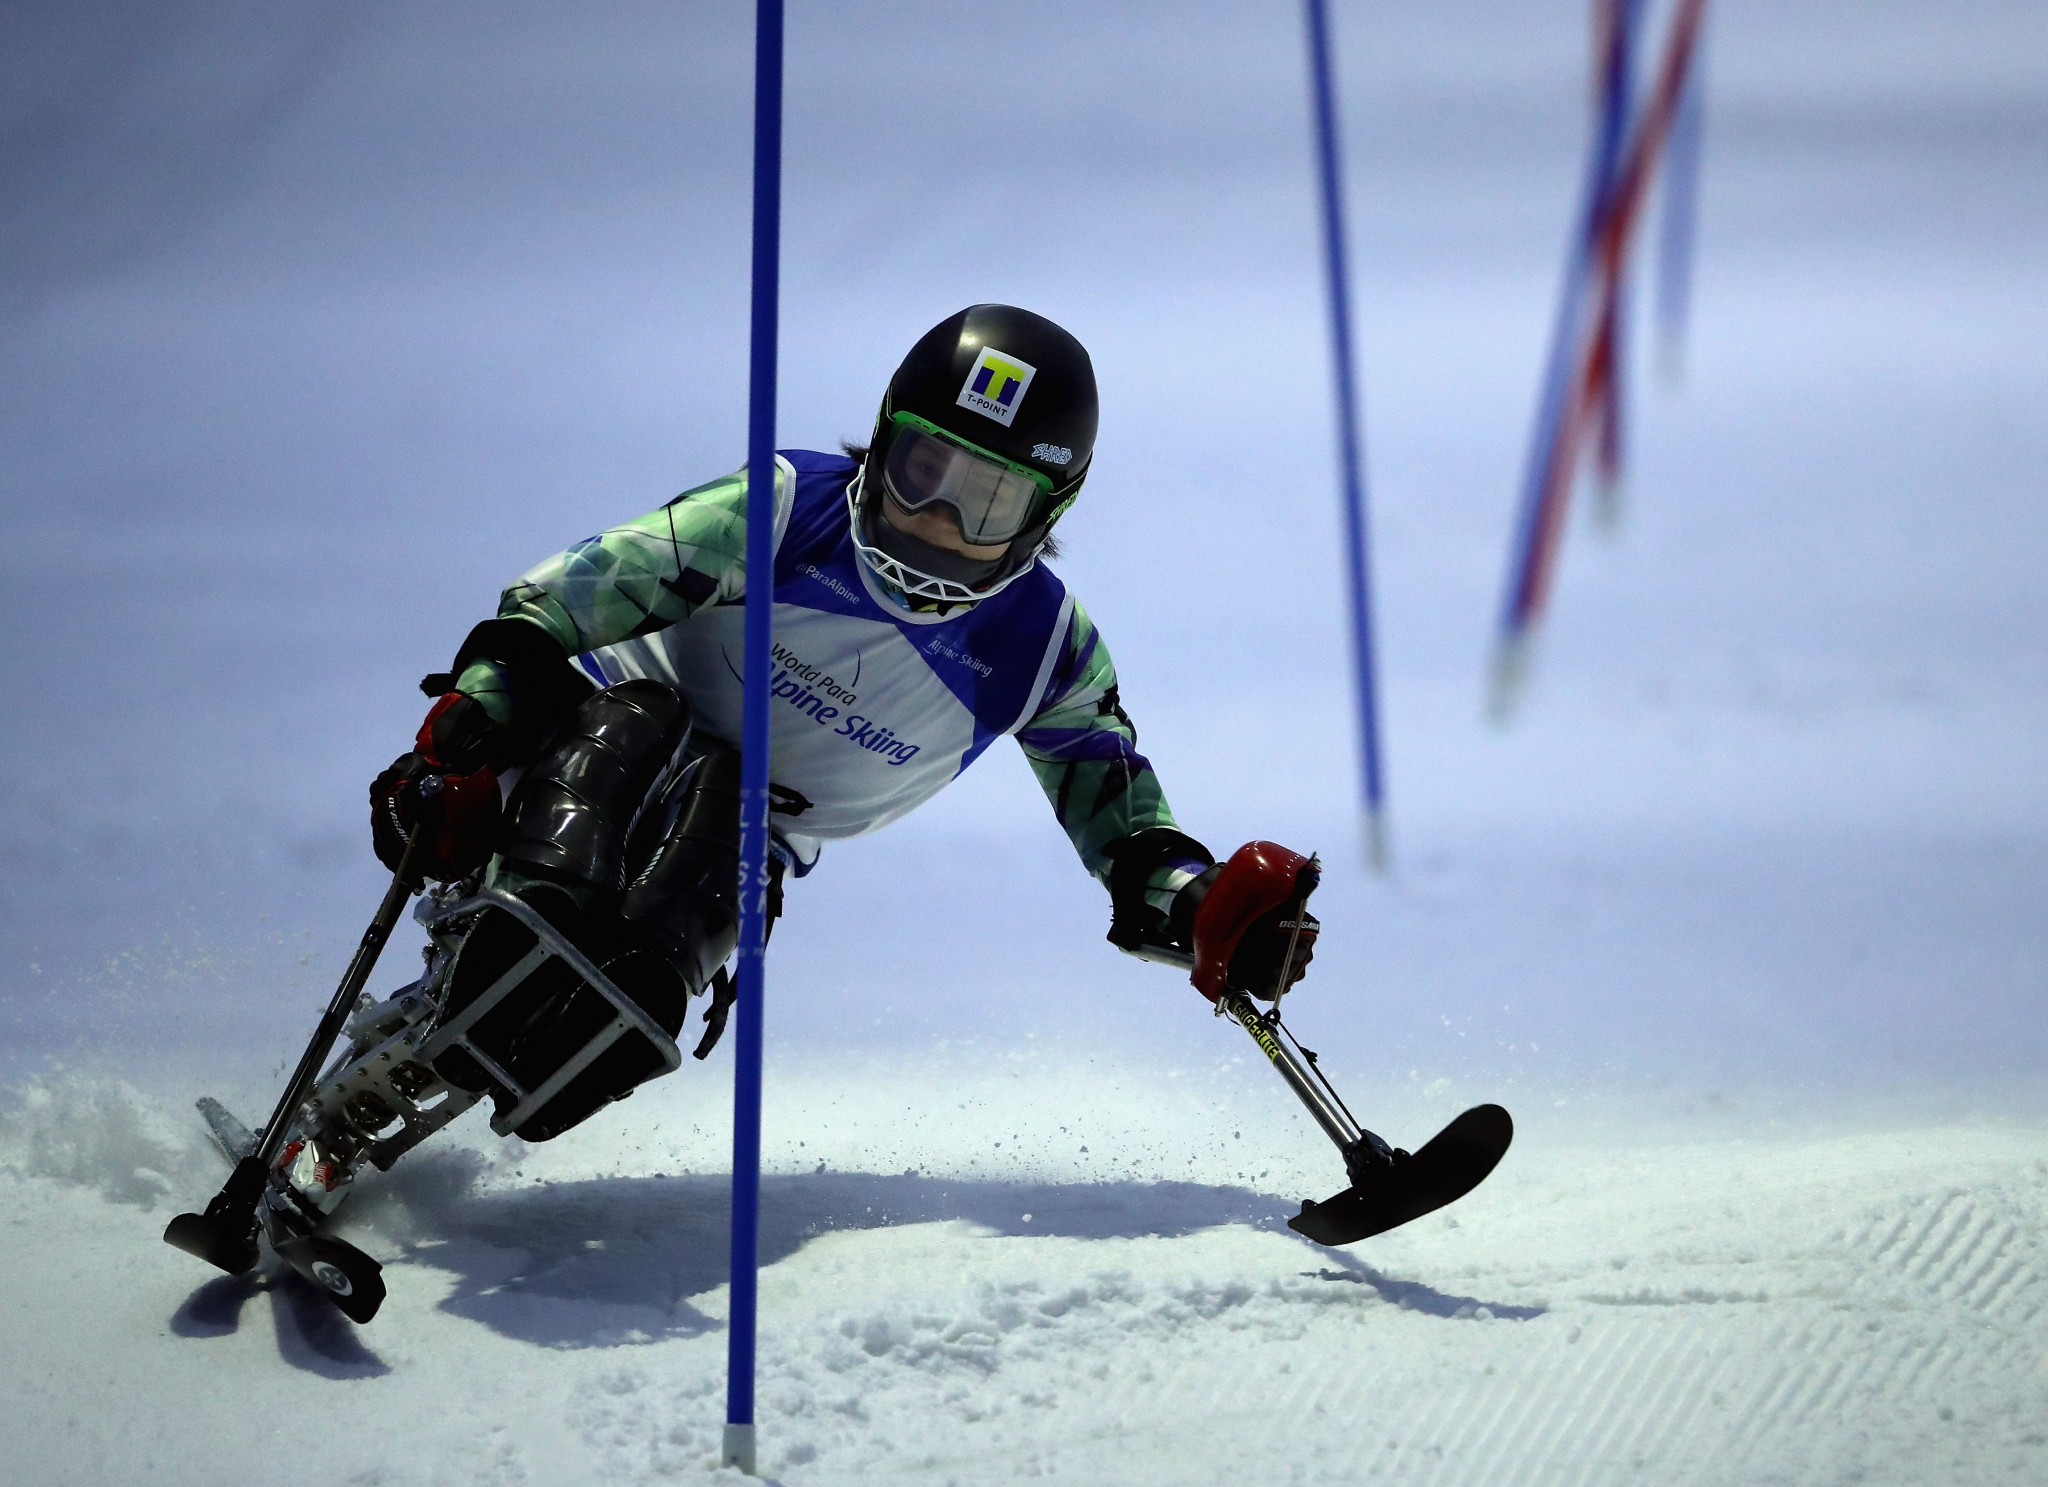 TechnoAlpin's cooperation with World Para Snow Sports extends to Para Alpine skiing among other sports ©Getty Images